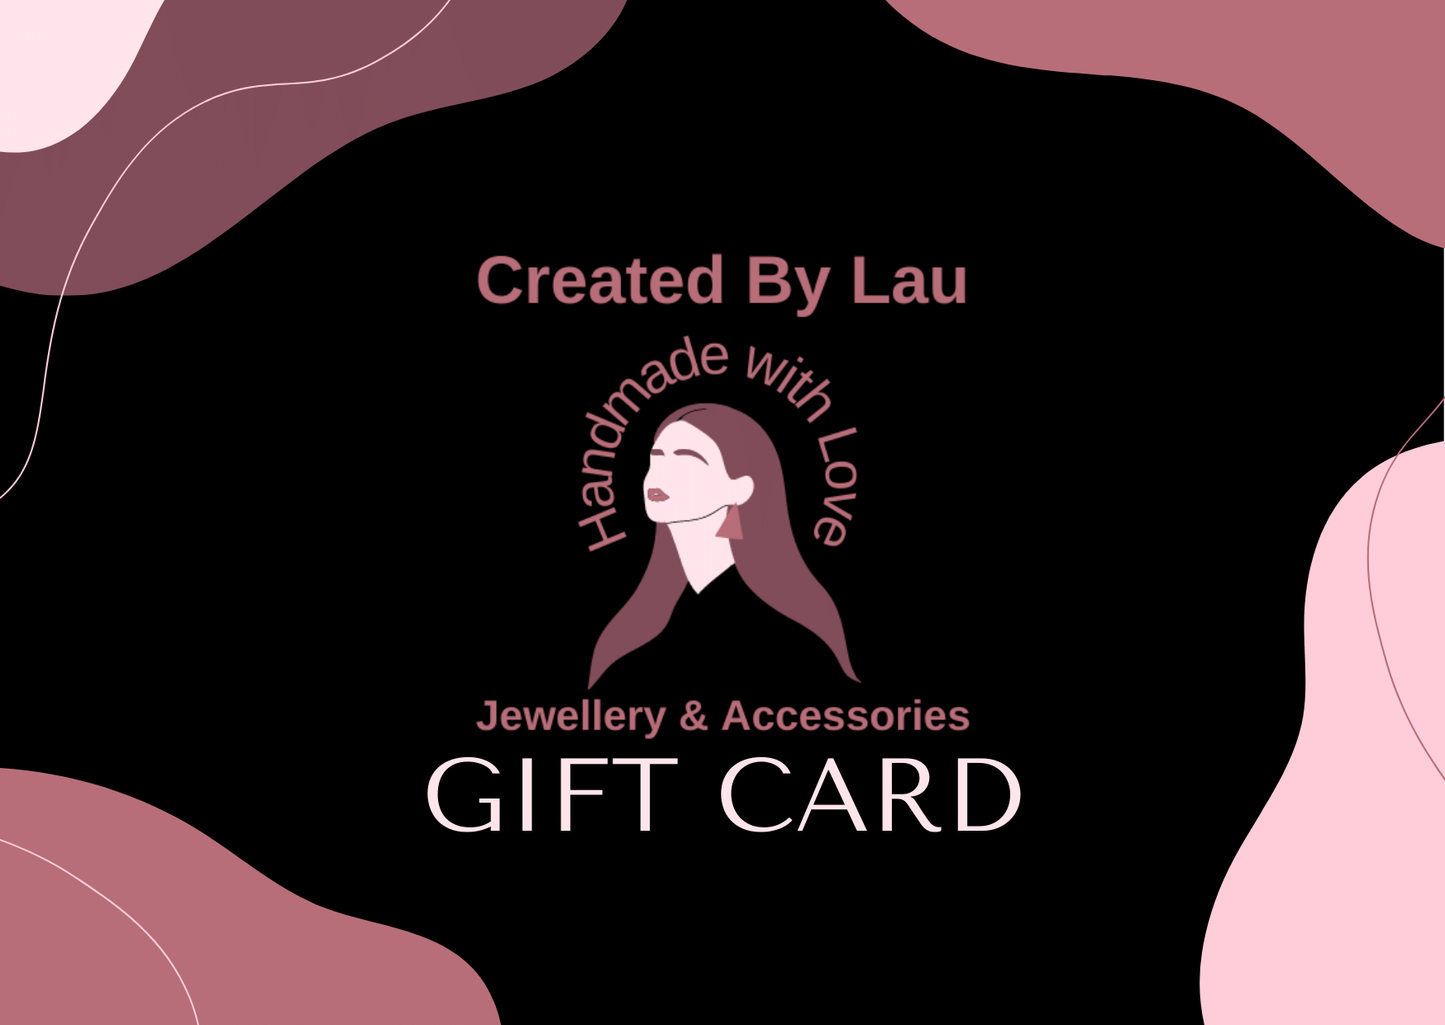 Created By Lau Gift Card